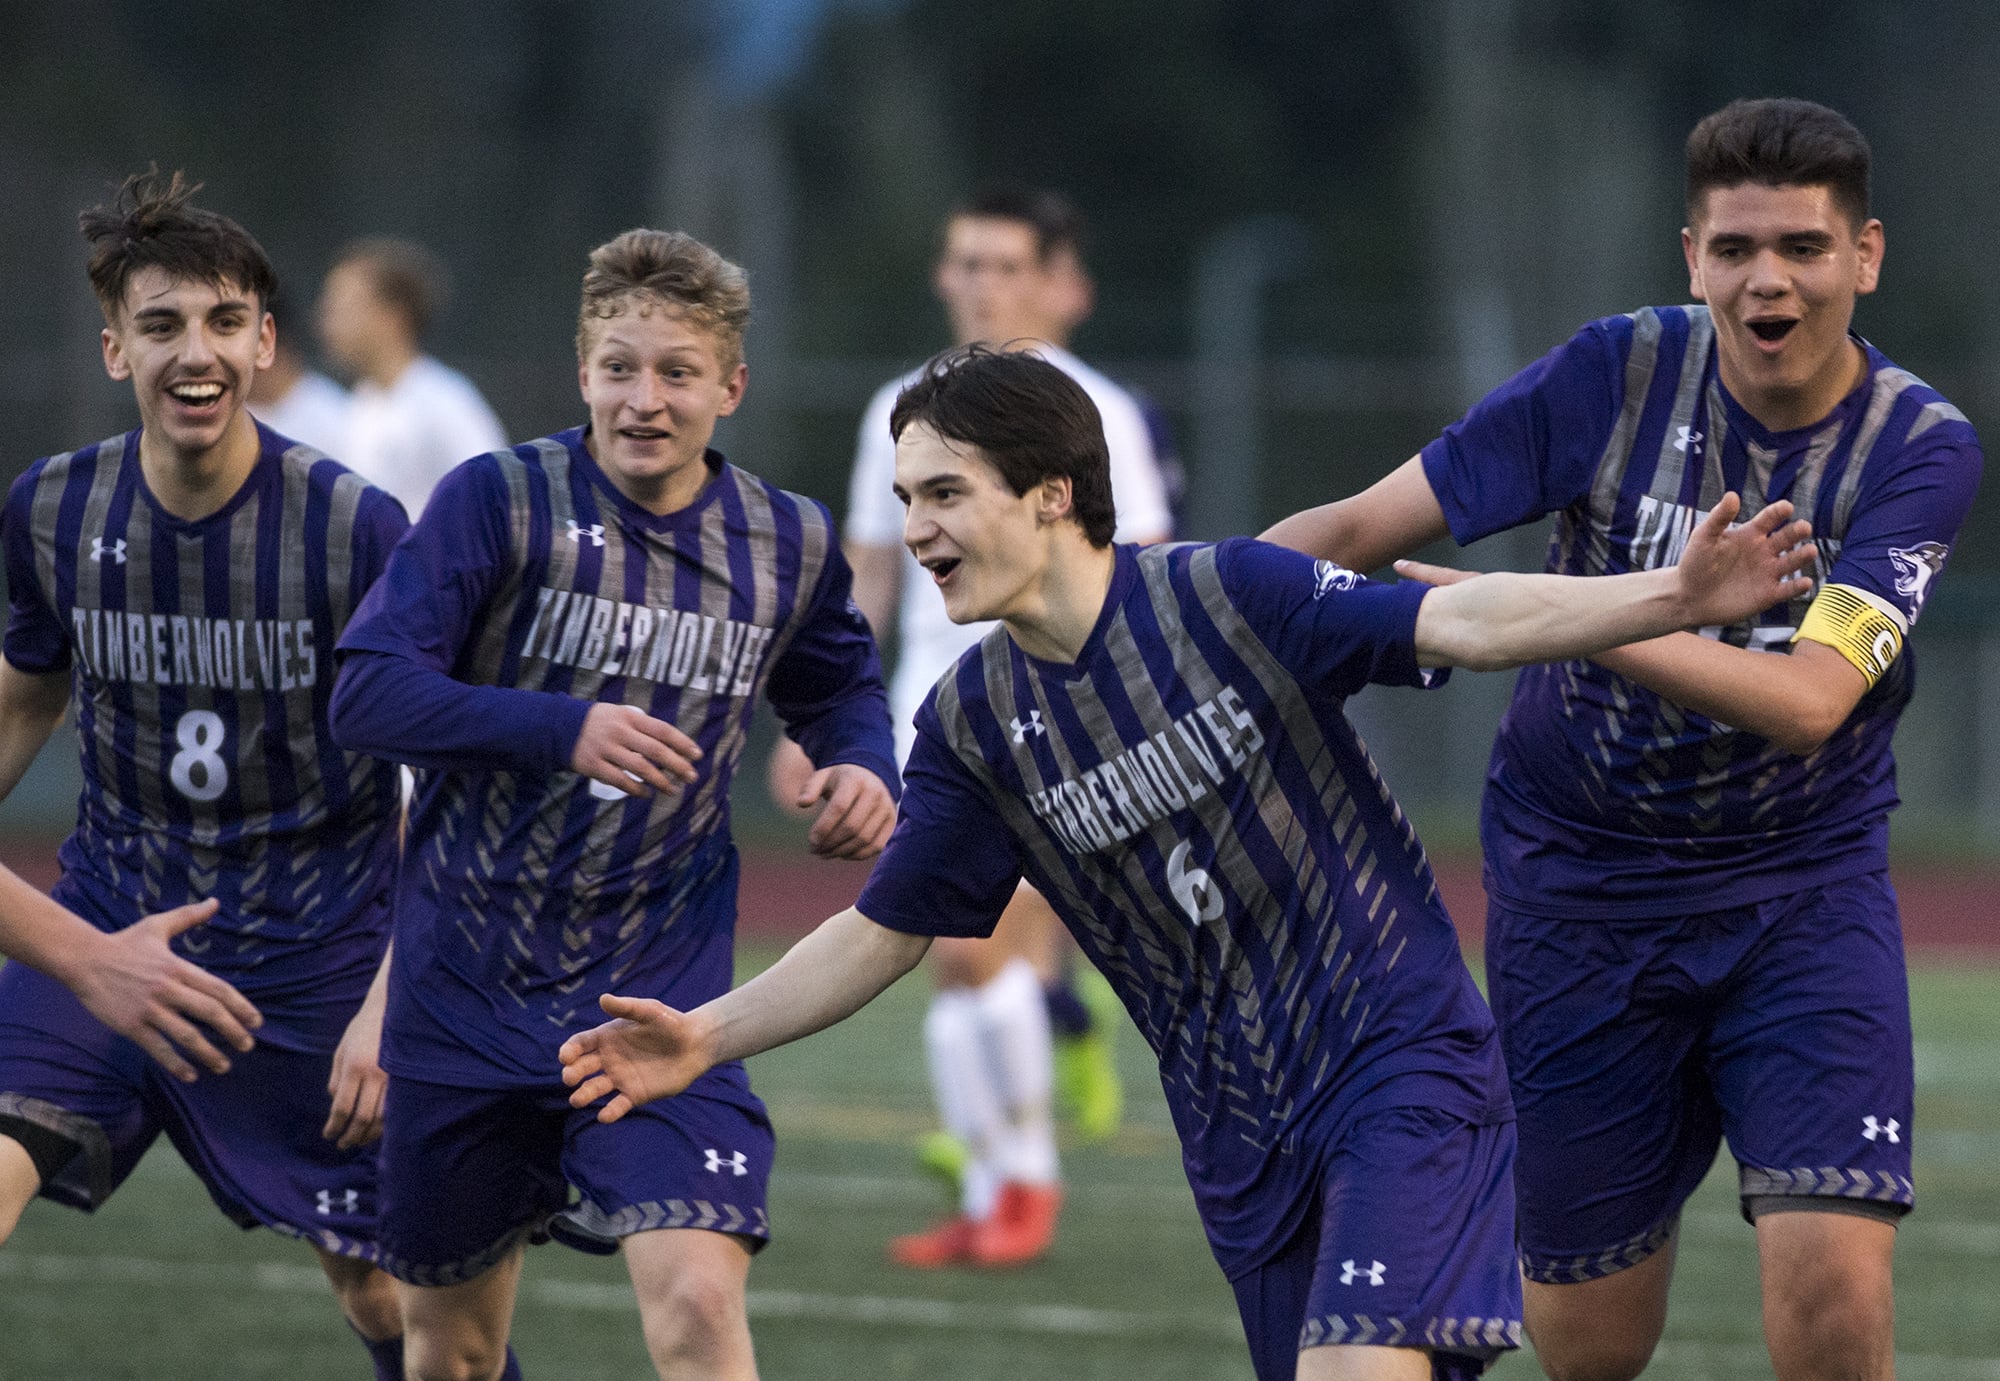 Heritage's Ibra Katchiev (6) celebrates his goal against Skyview during Tuesday night's soccer game at McKenzie Stadium in Vancouver on March 26, 2019.